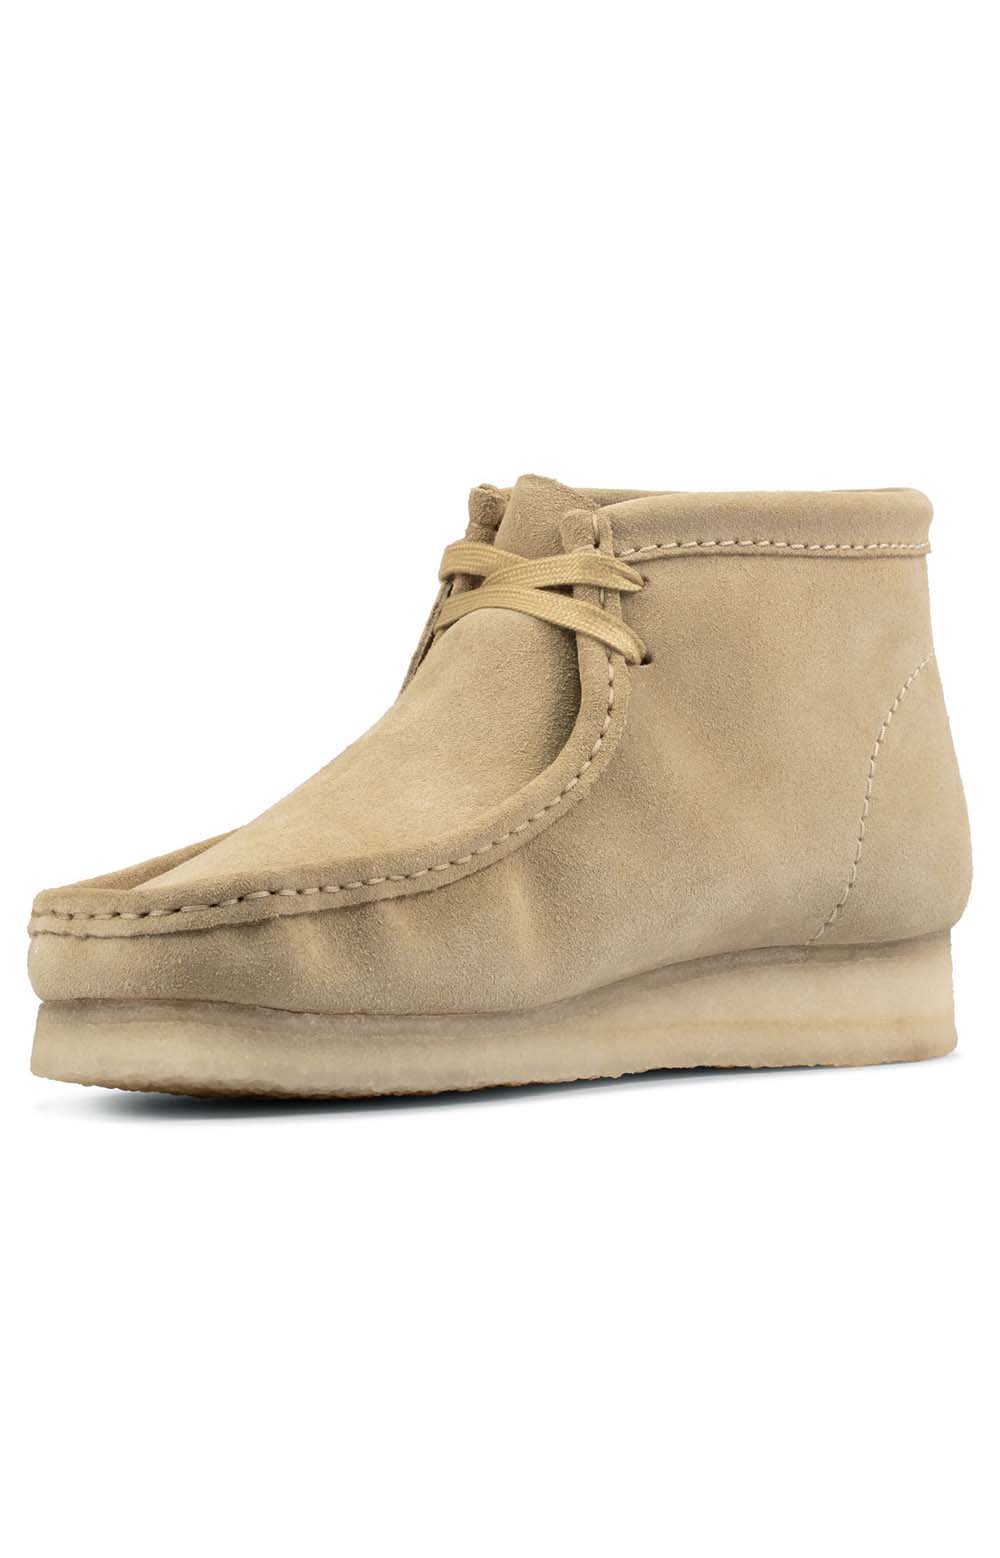 Clarks Originals Wallabee Boot Men's Maple Suede 26155516 in a classic lace-up design with premium suede material and comfortable crepe sole, perfect for casual wear and stylish street fashion